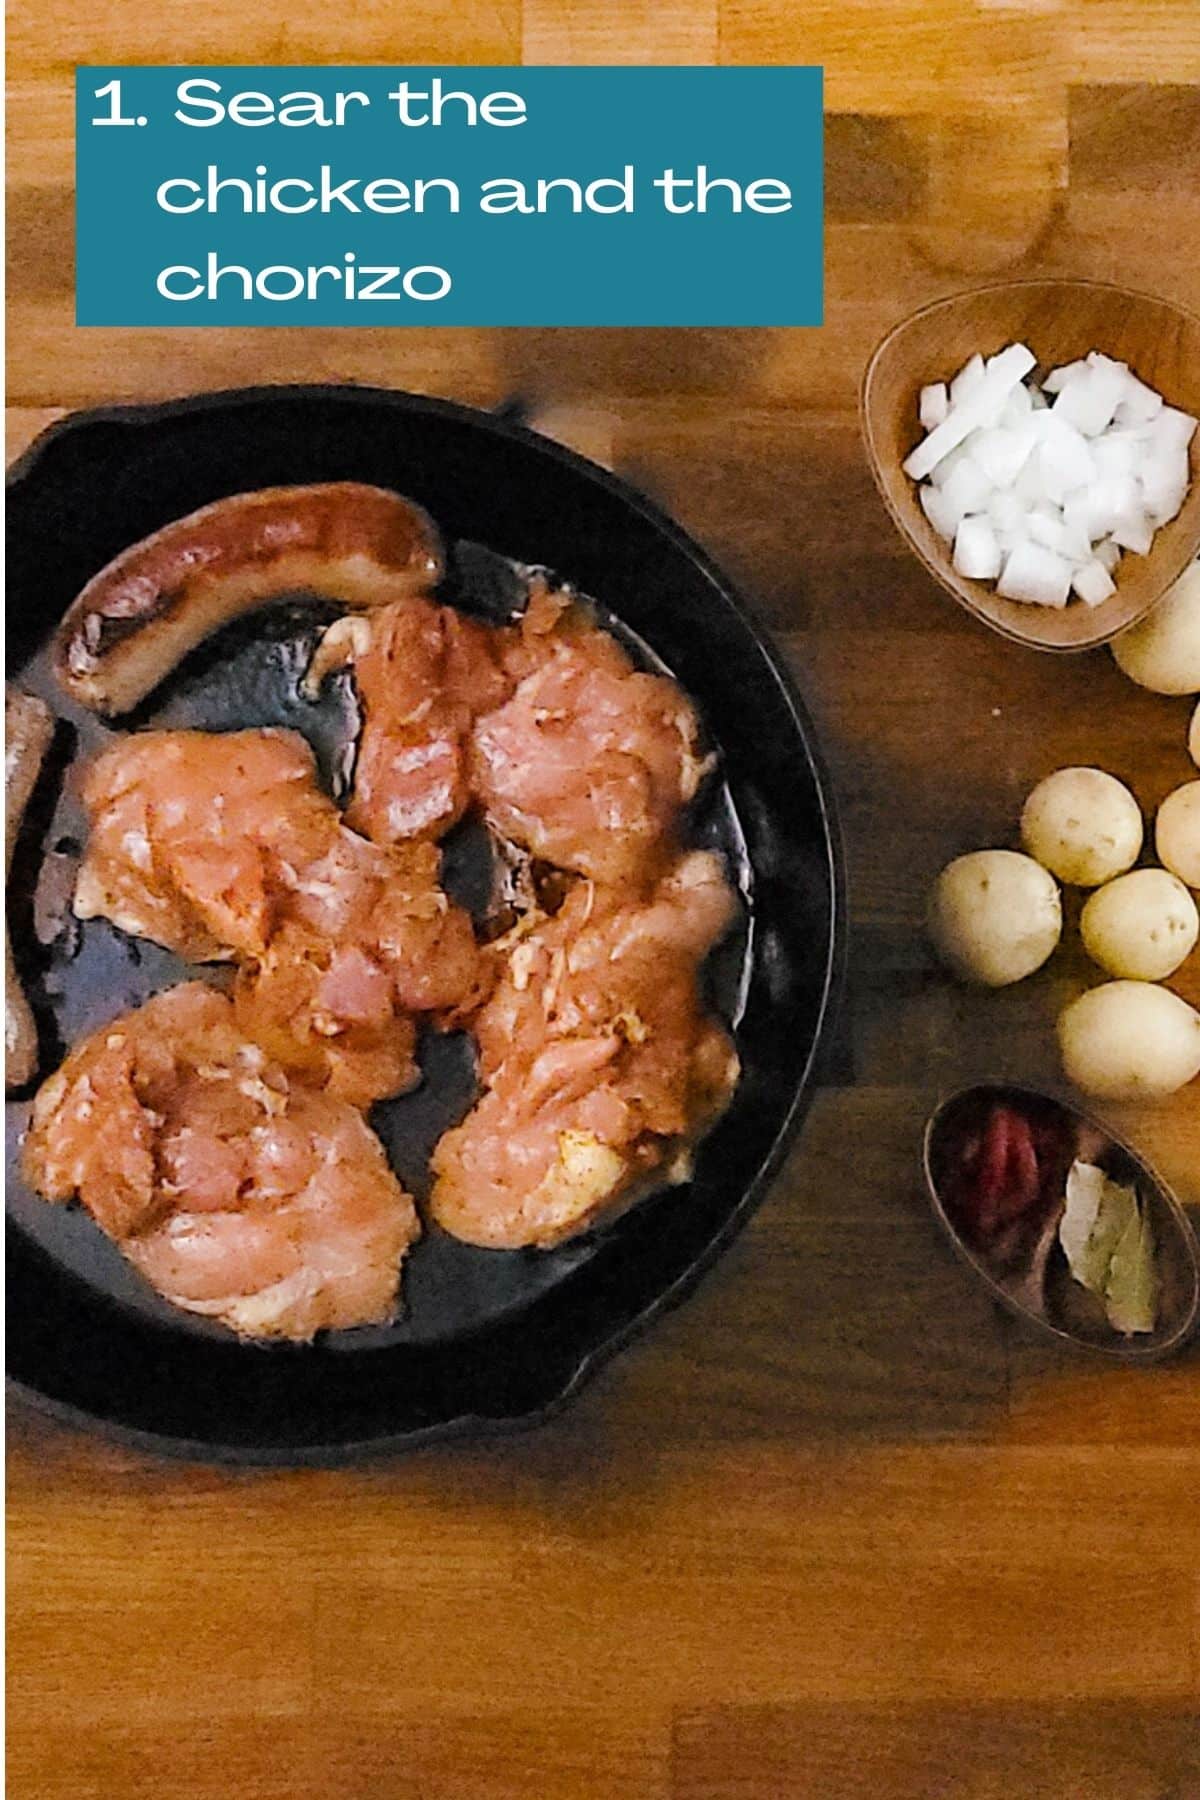 searing chicken and chorizo in a cast iron skillet. view of ingredients that will be added, like onions, potatoes, tomatoes paste and bay leaves.